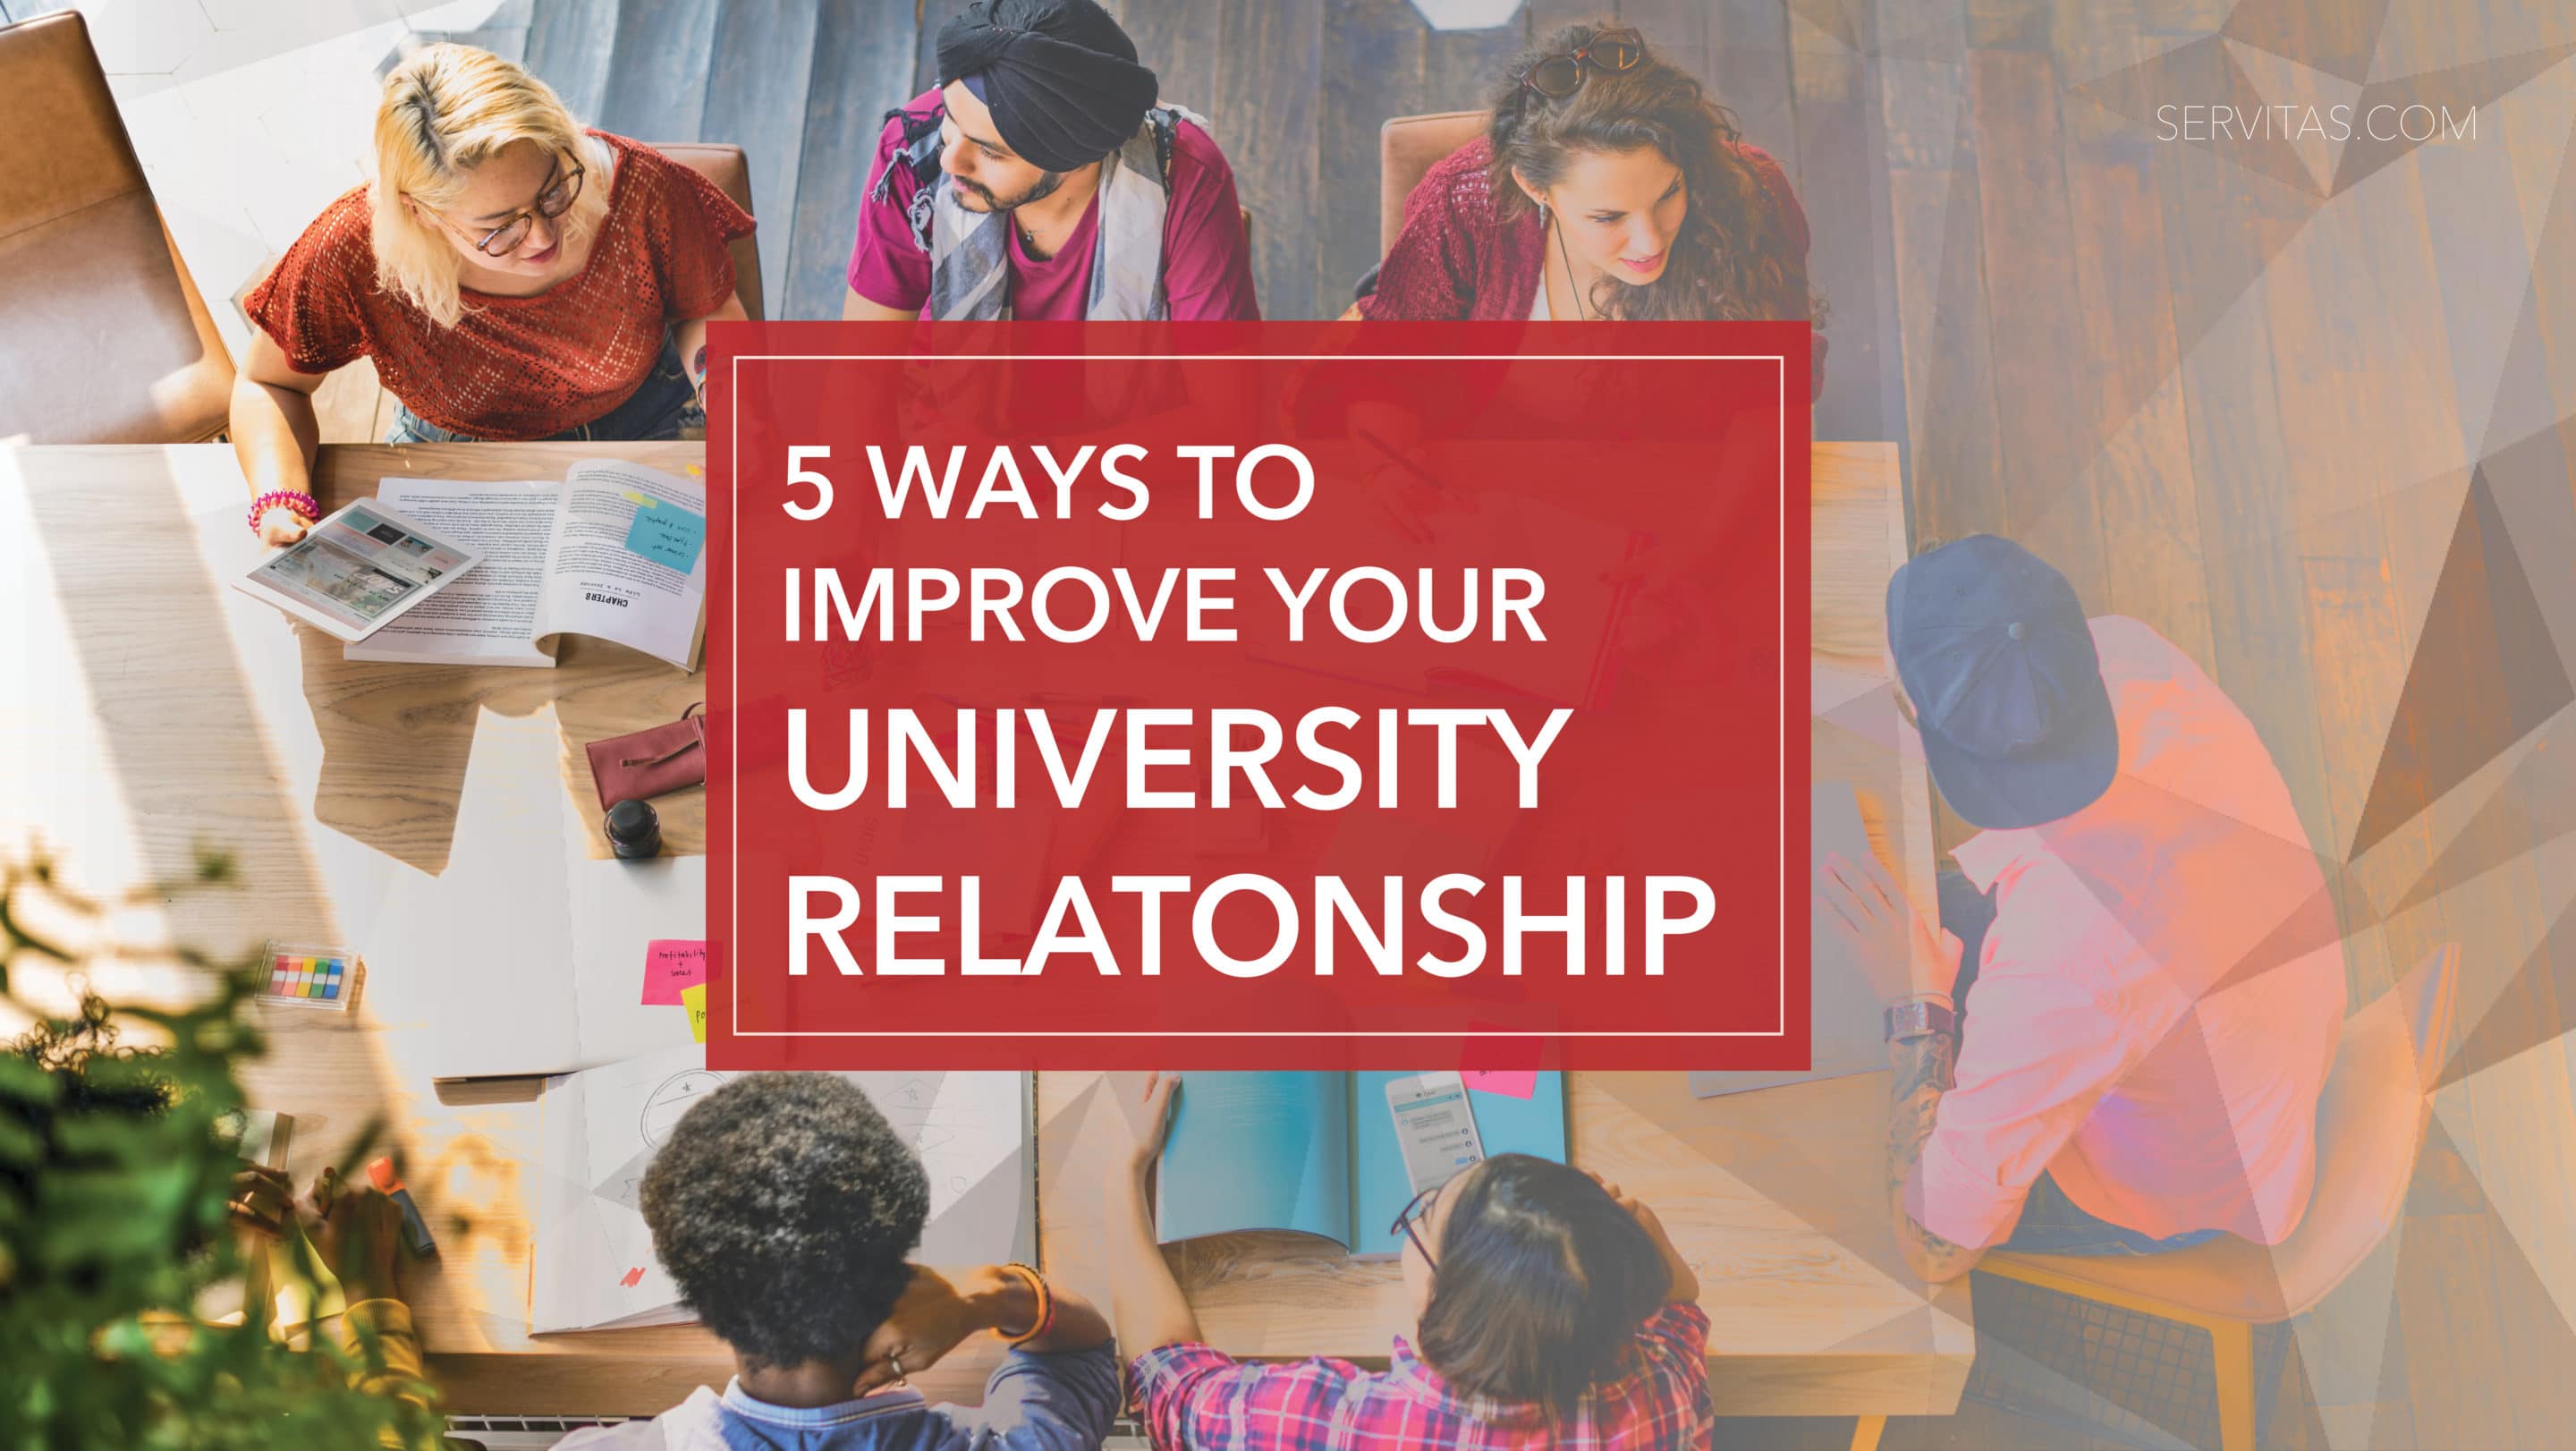 5 Ways to Improve University Relationship as A Student Housing Management Company